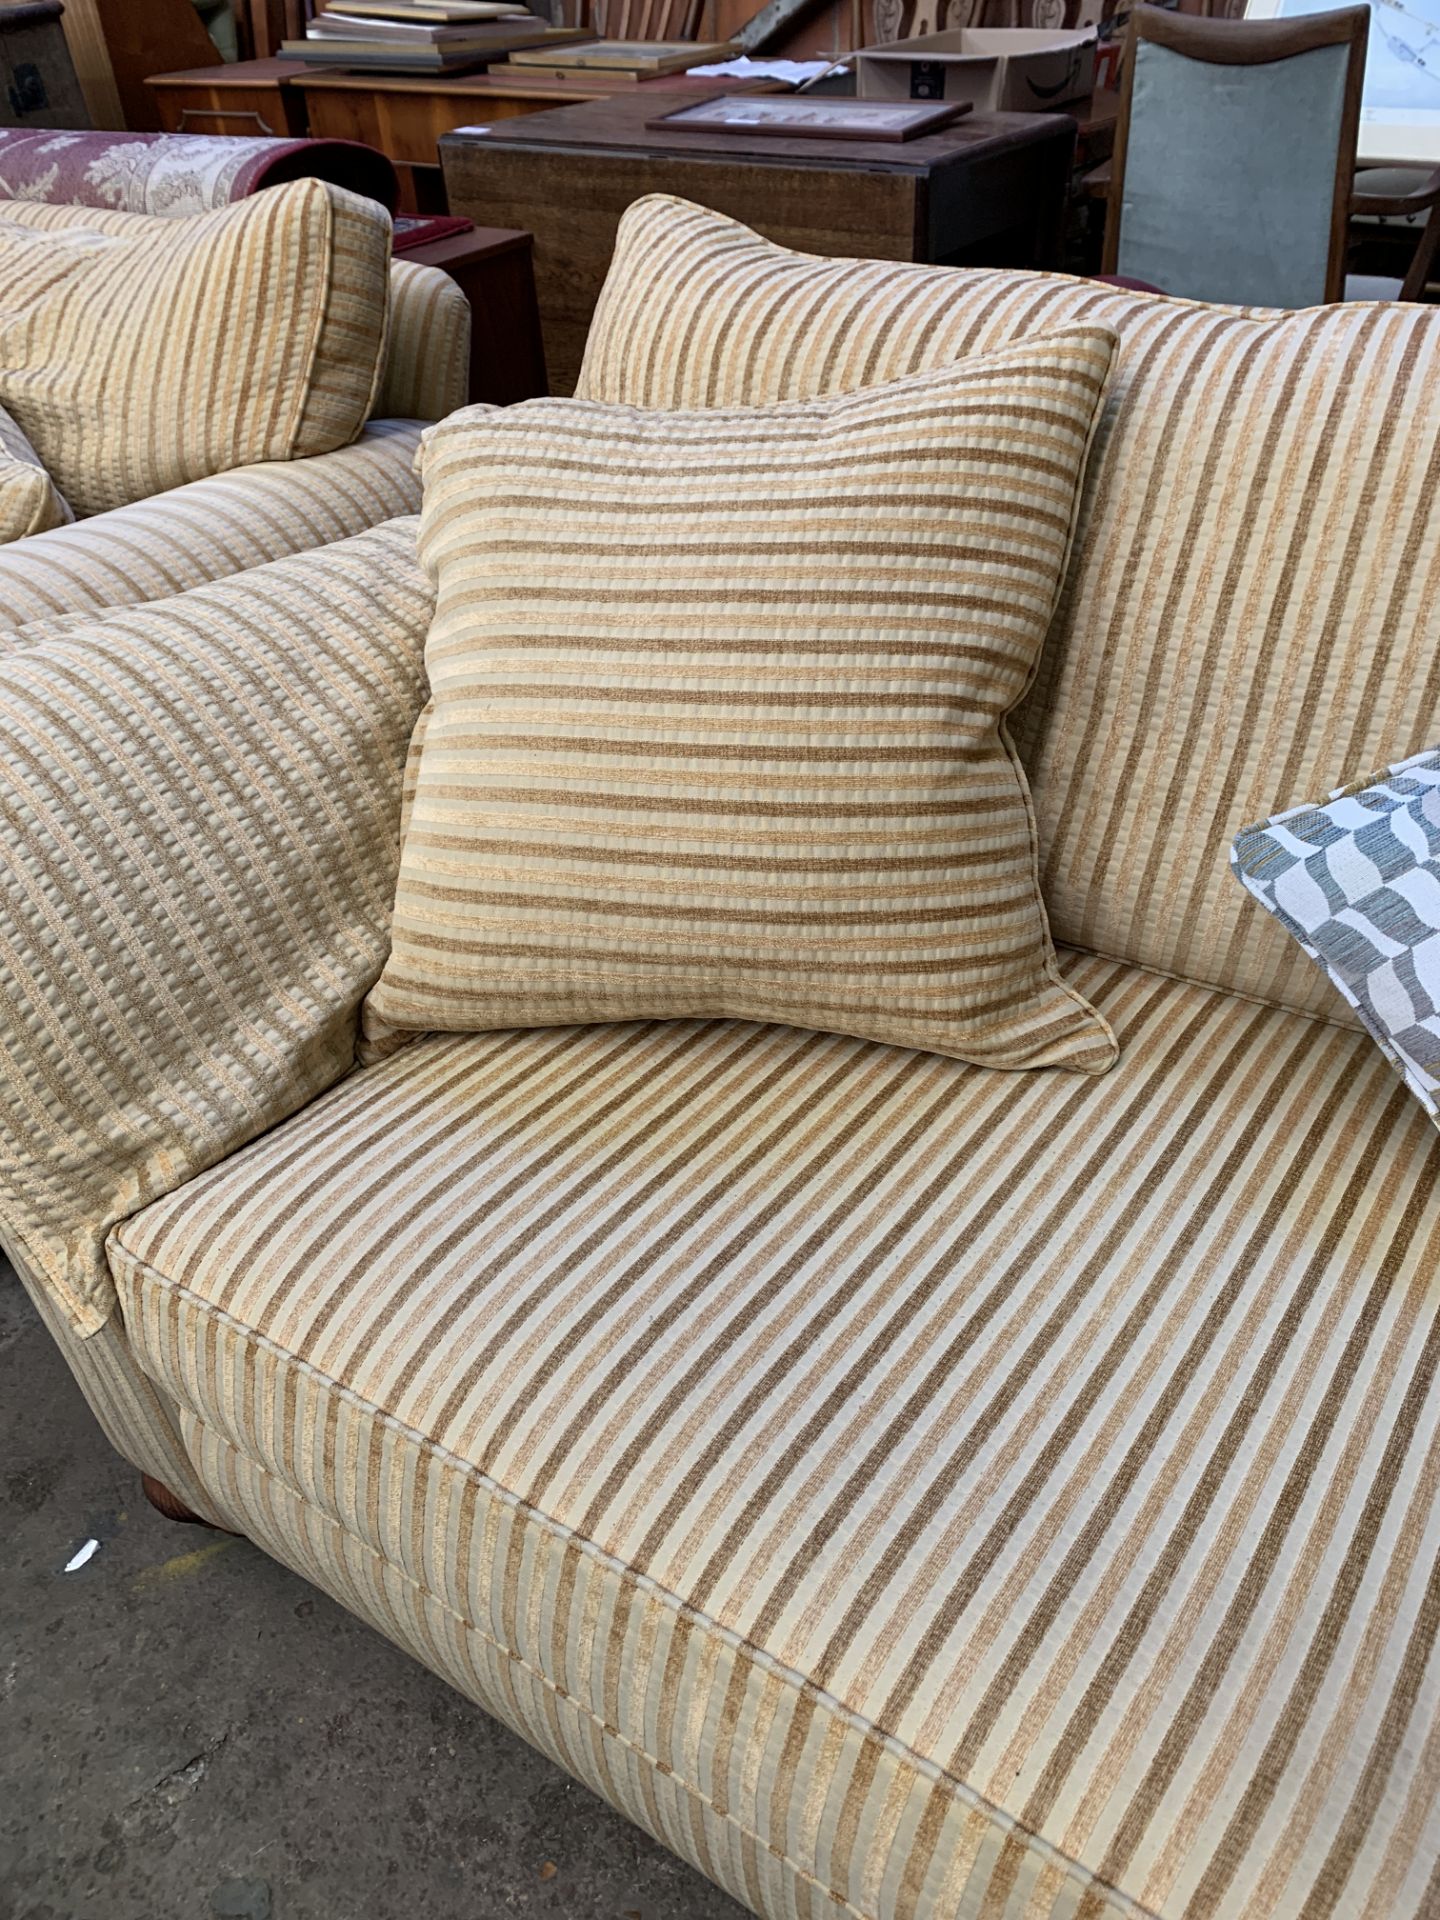 Three seat sofa upholstered in gold coloured striped fabric - Image 3 of 4